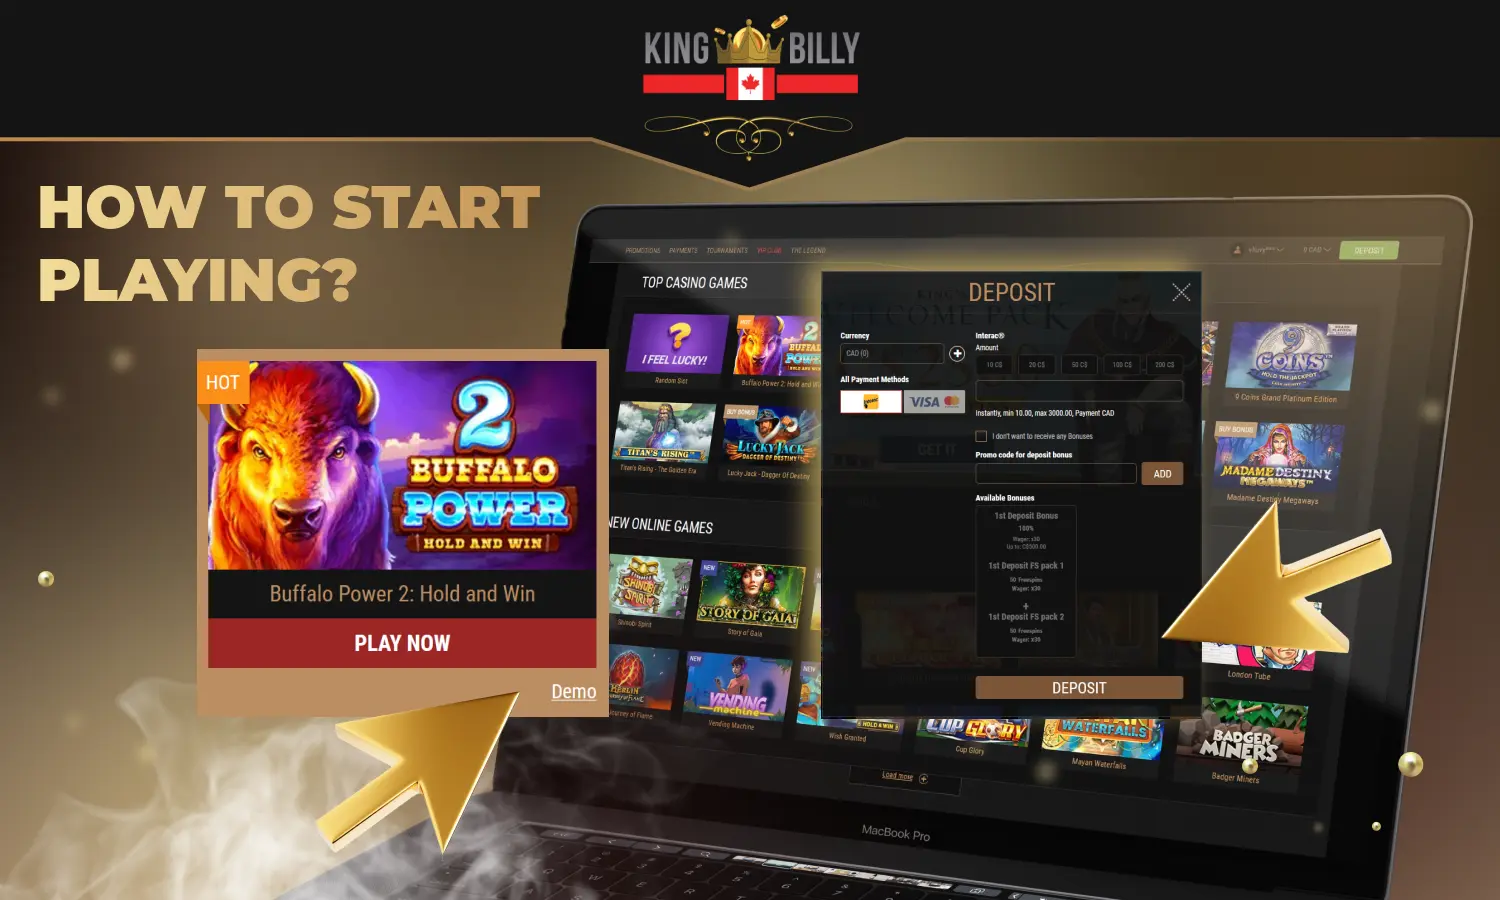 How can a beginner from Canada start playing at King Billy Casino